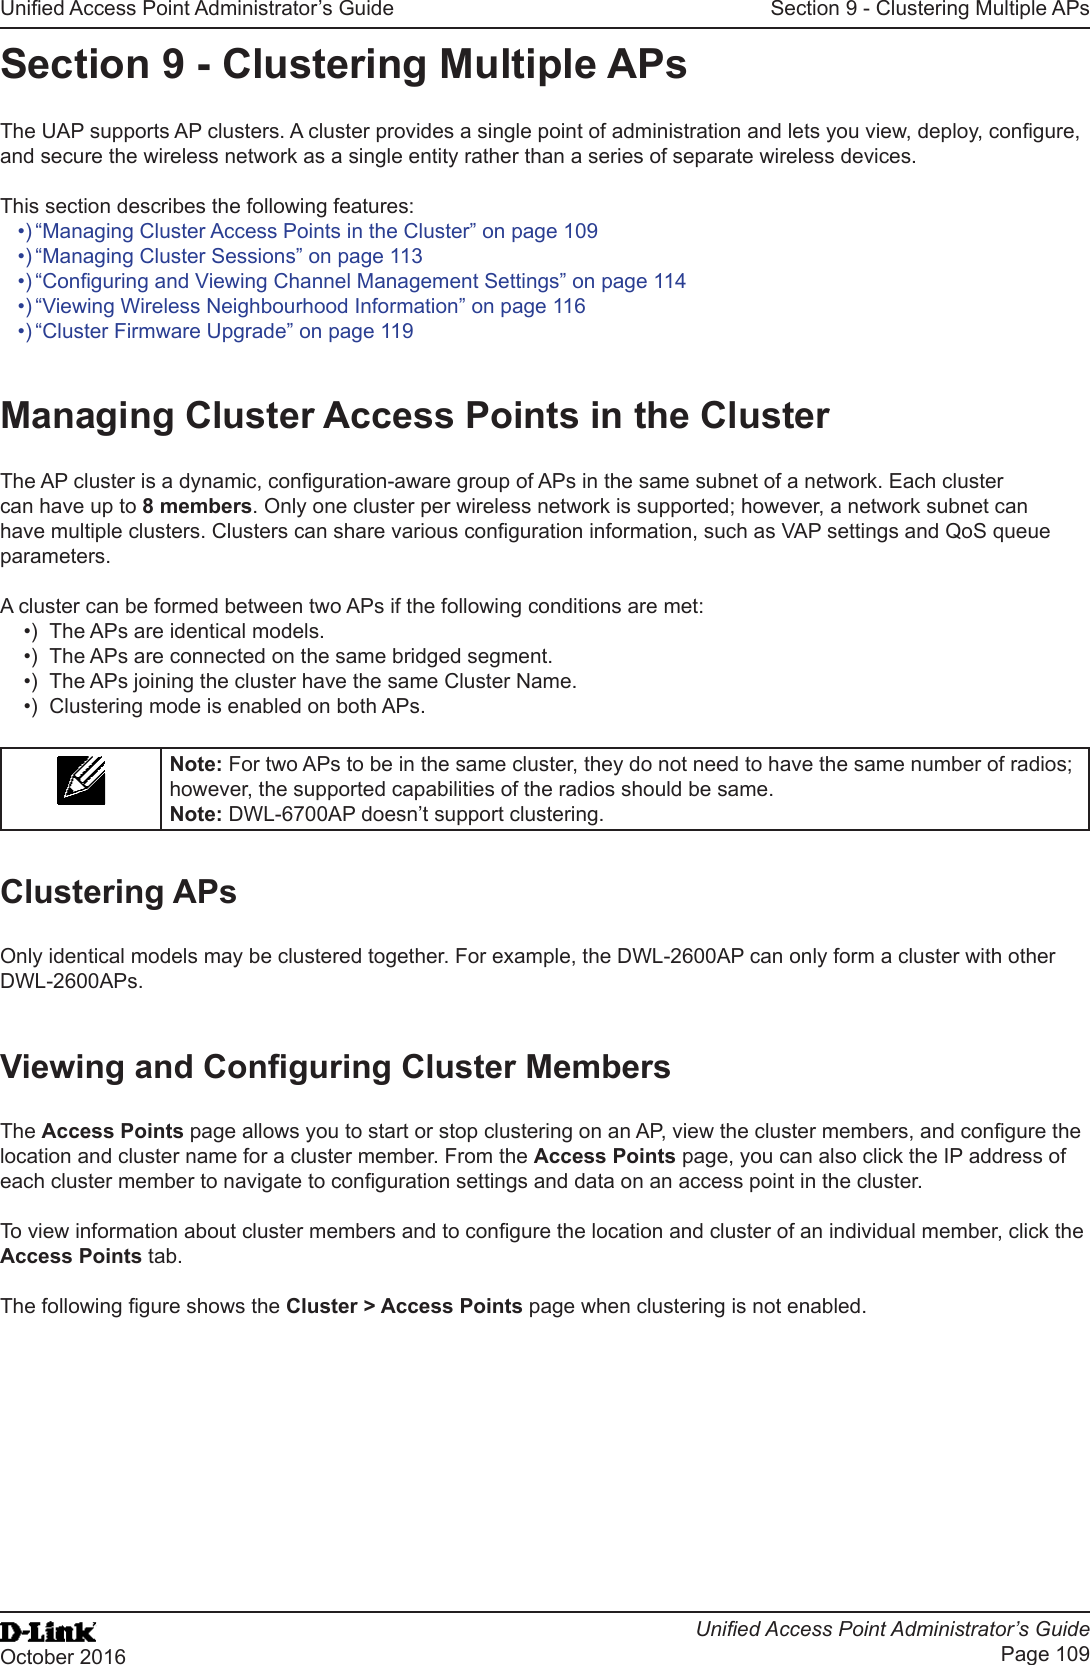 Unied Access Point Administrator’s GuideUnied Access Point Administrator’s GuidePage 109October 2016Section 9 - Clustering Multiple APsSection 9 - Clustering Multiple APsThe UAP supports AP clusters. A cluster provides a single point of administration and lets you view, deploy, congure, and secure the wireless network as a single entity rather than a series of separate wireless devices. This section describes the following features:•) “Managing Cluster Access Points in the Cluster” on page 109•) “Managing Cluster Sessions” on page 113•) “Conguring and Viewing Channel Management Settings” on page 114•) “Viewing Wireless Neighbourhood Information” on page 116•) “Cluster Firmware Upgrade” on page 119Managing Cluster Access Points in the ClusterThe AP cluster is a dynamic, conguration-aware group of APs in the same subnet of a network. Each cluster can have up to 8 members. Only one cluster per wireless network is supported; however, a network subnet can have multiple clusters. Clusters can share various conguration information, such as VAP settings and QoS queue parameters.A cluster can be formed between two APs if the following conditions are met:•)  The APs are identical models.•)  The APs are connected on the same bridged segment.•)  The APs joining the cluster have the same Cluster Name.•)  Clustering mode is enabled on both APs.Note: For two APs to be in the same cluster, they do not need to have the same number of radios; however, the supported capabilities of the radios should be same.Note: DWL-6700AP doesn’t support clustering. Clustering APsOnly identical models may be clustered together. For example, the DWL-2600AP can only form a cluster with other DWL-2600APs.Viewing and Conguring Cluster MembersThe Access Points page allows you to start or stop clustering on an AP, view the cluster members, and congure the location and cluster name for a cluster member. From the Access Points page, you can also click the IP address of each cluster member to navigate to conguration settings and data on an access point in the cluster. To view information about cluster members and to congure the location and cluster of an individual member, click the Access Points tab.The following gure shows the Cluster &gt; Access Points page when clustering is not enabled.